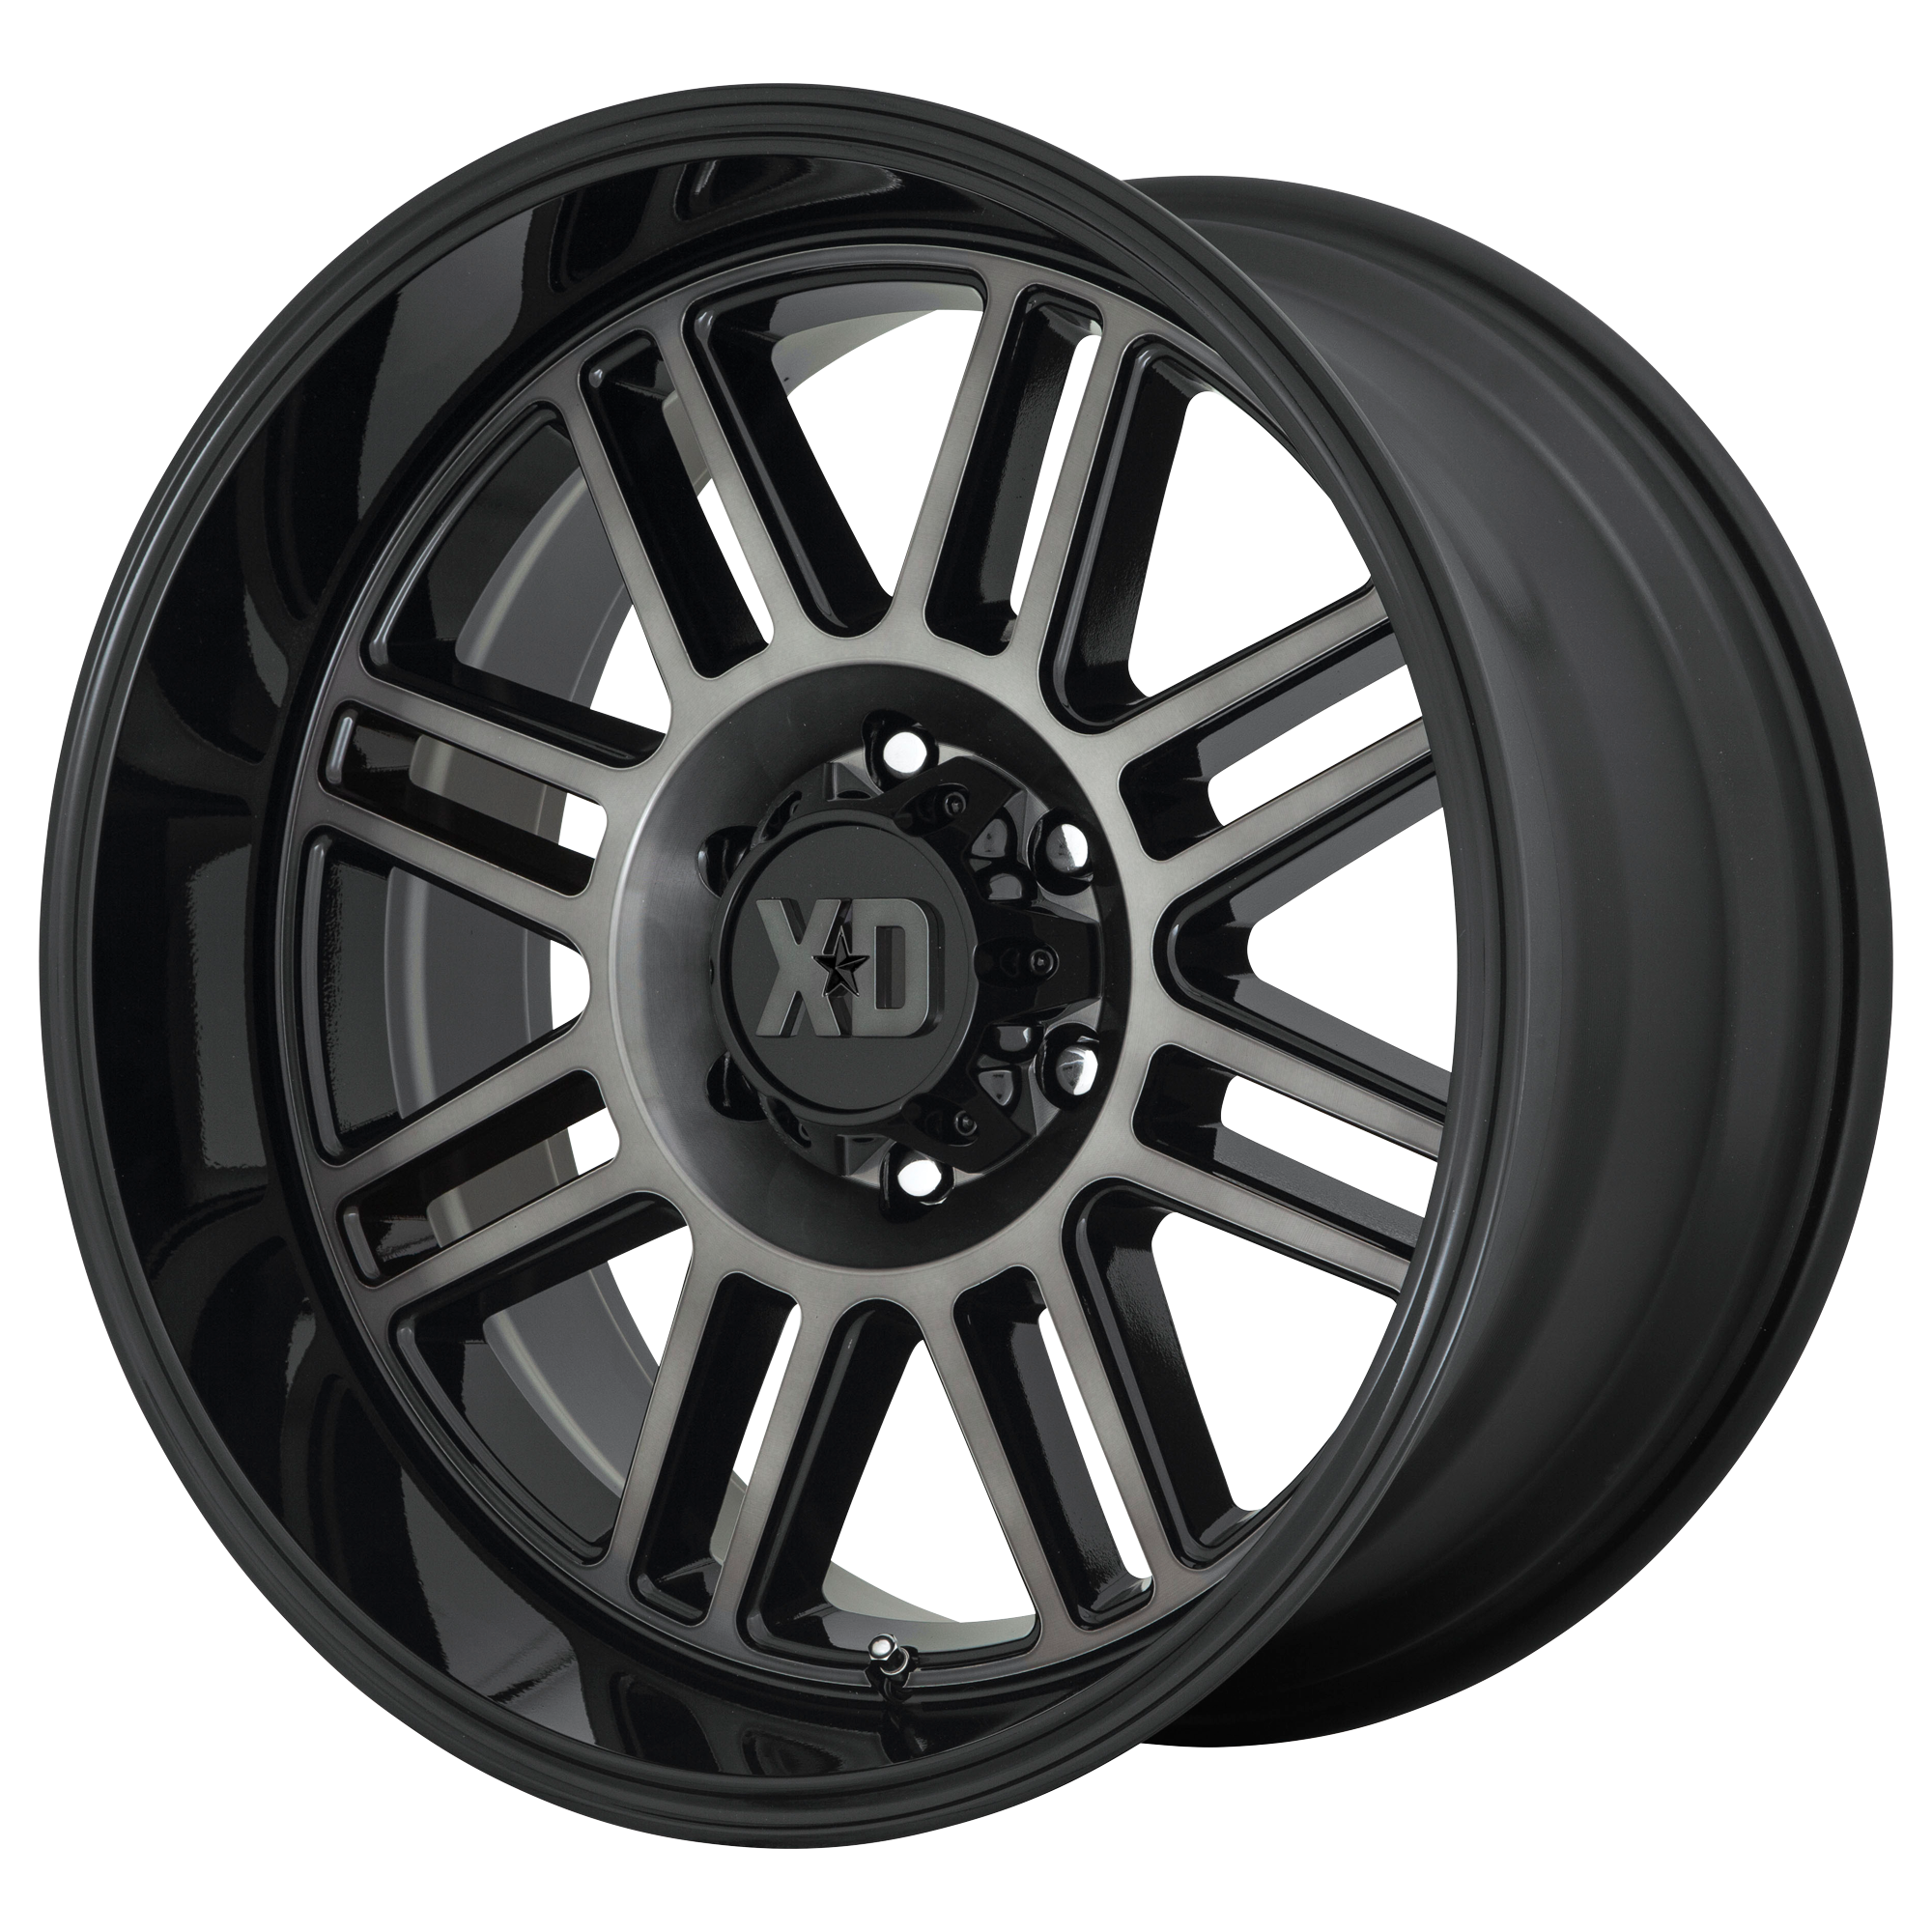 CAGE 22x10 8x170.00 GLOSS BLACK W/ GRAY TINT (-18 mm) - Tires and Engine Performance